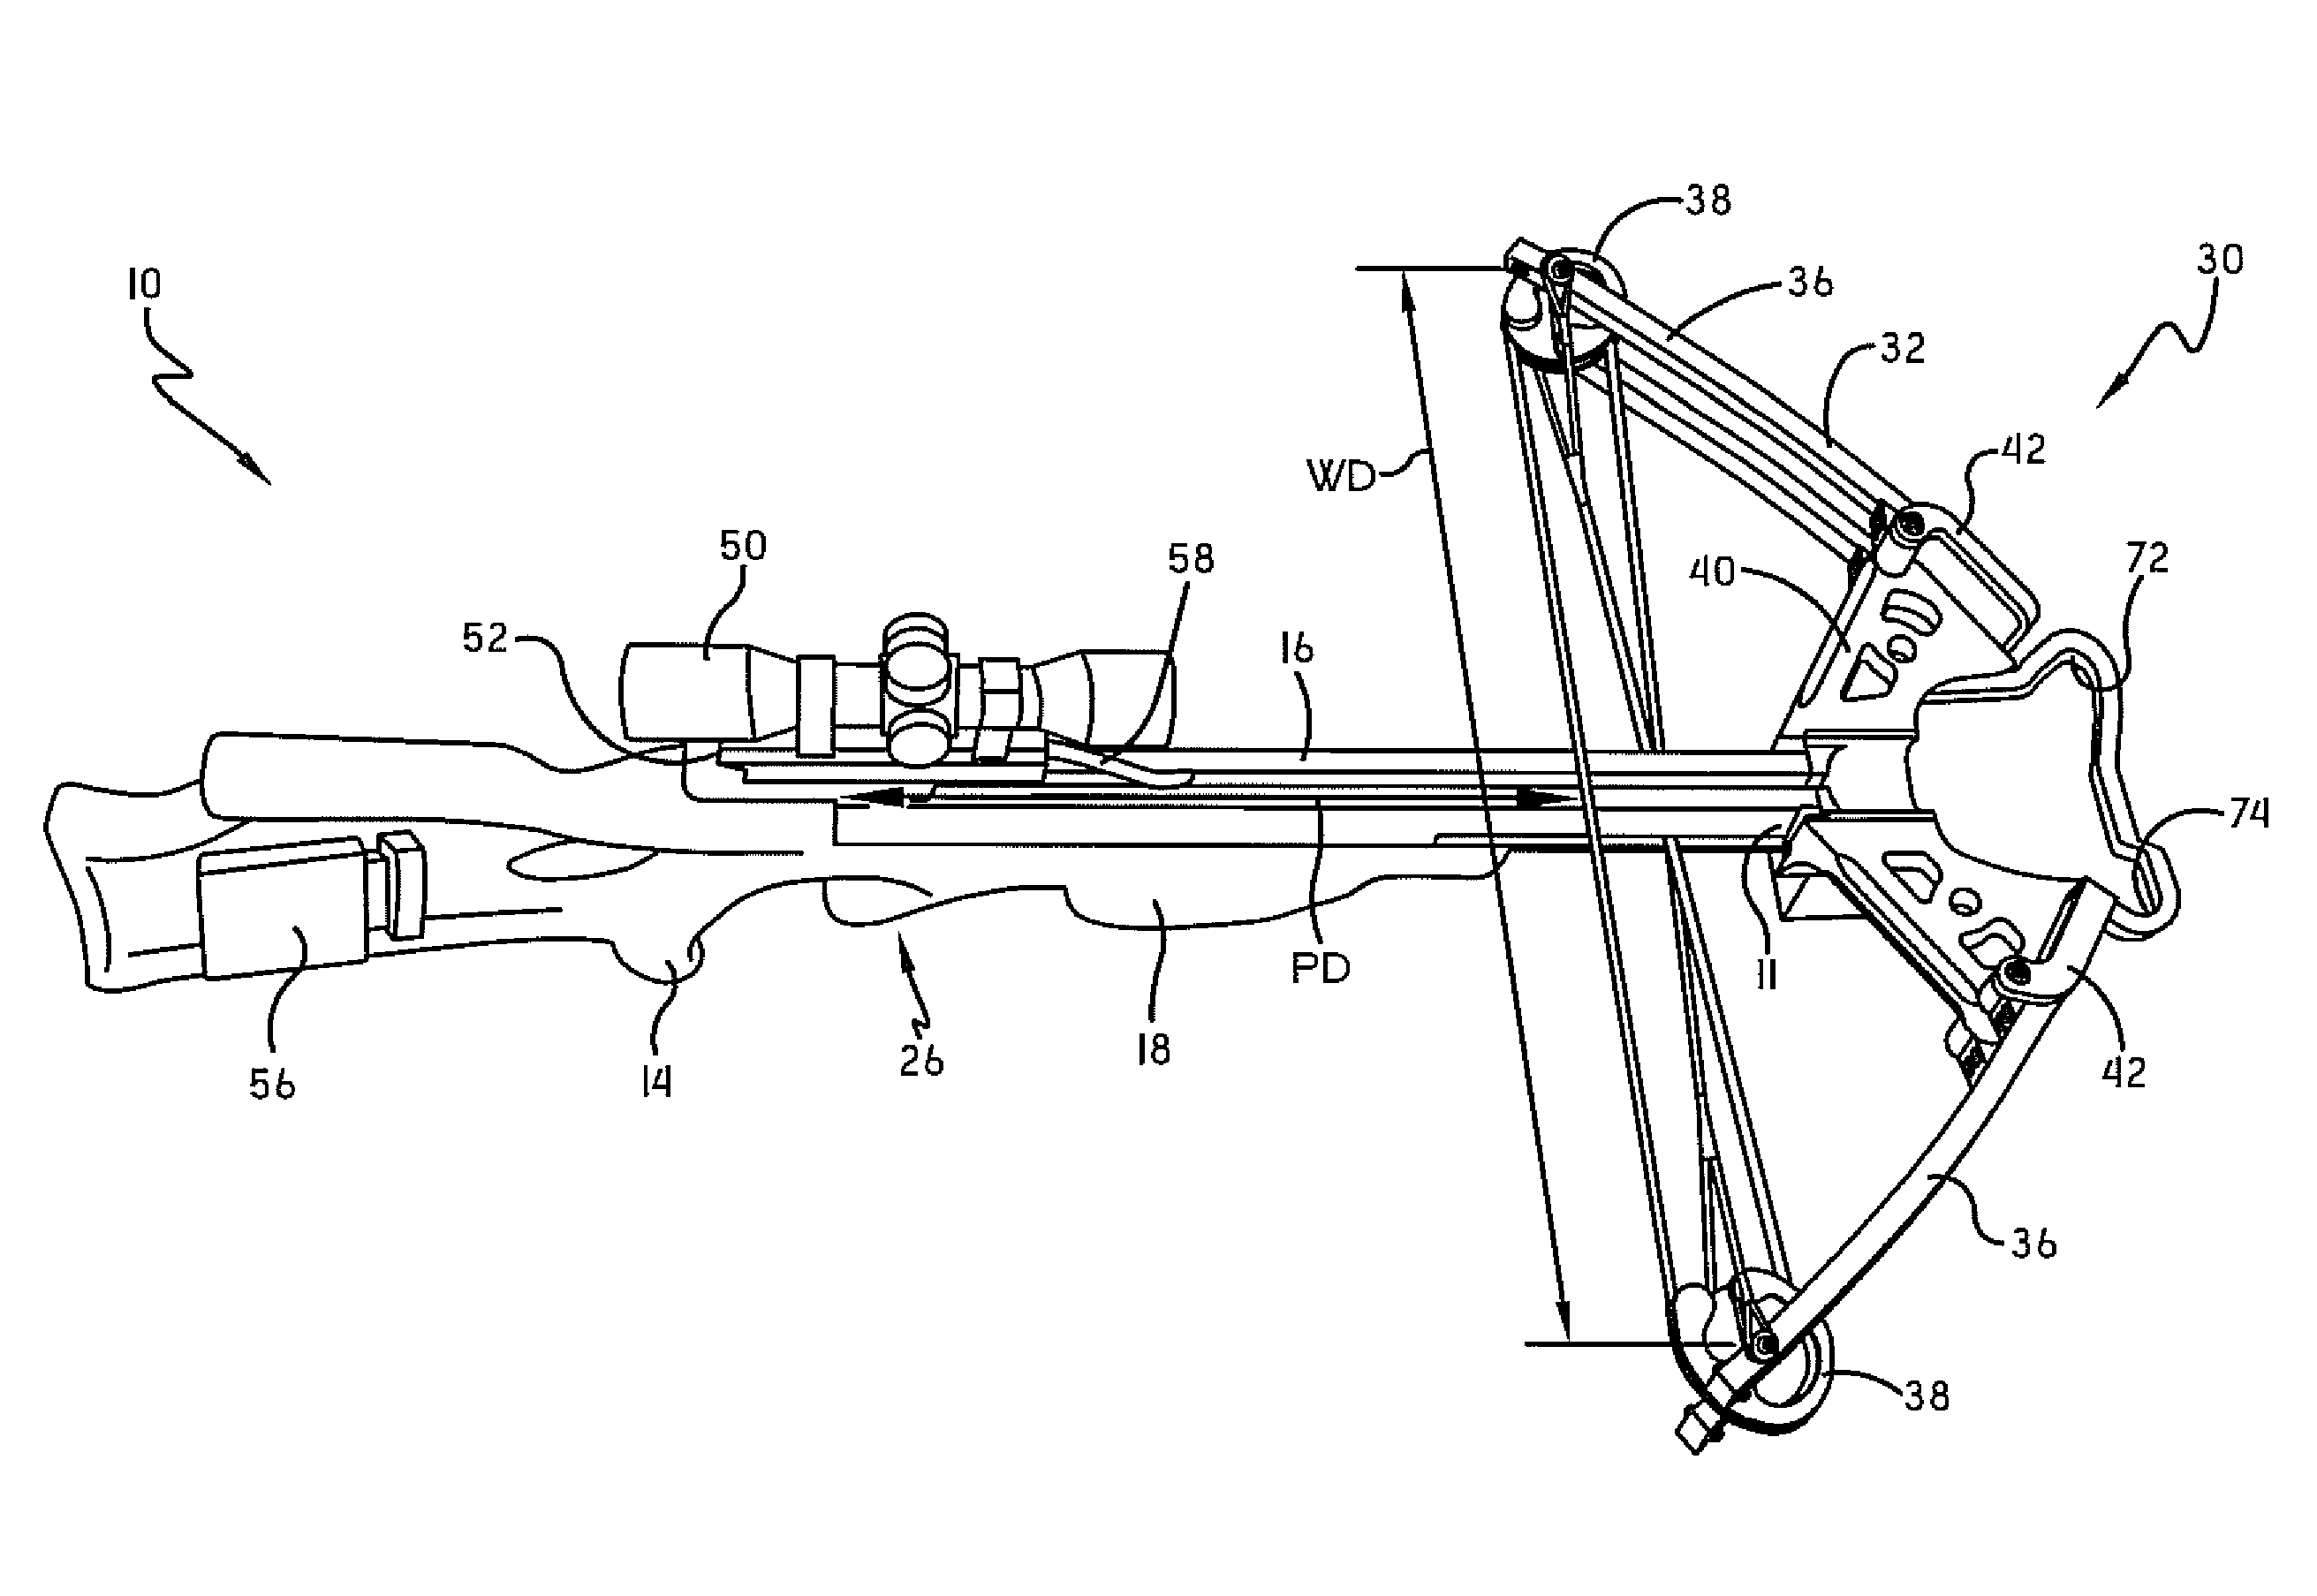 Narrow crossbow with large power stroke